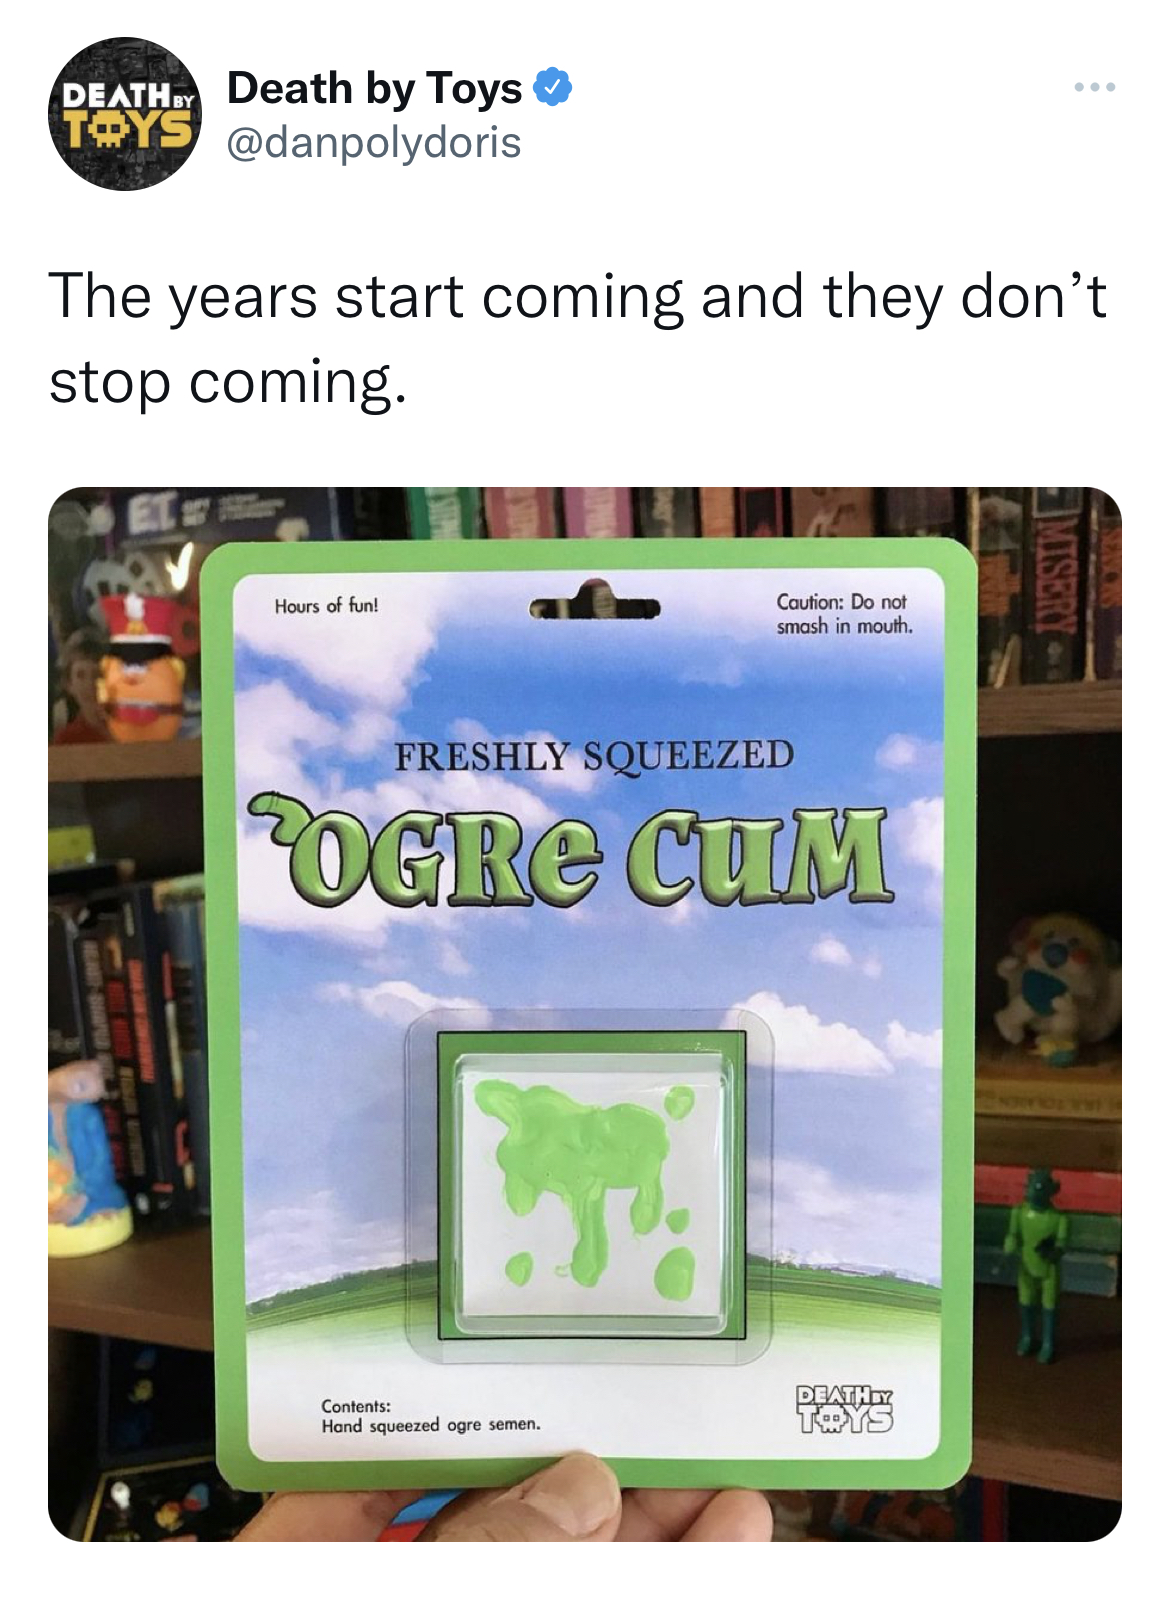 savage and funny tweets - software - Death Death by Toys Toys The years start coming and they don't stop coming. Hour of fun Caution Do not smo in mouth Freshly Squeezed Ogre Cum Come Hond das semen Death Toys Imisery